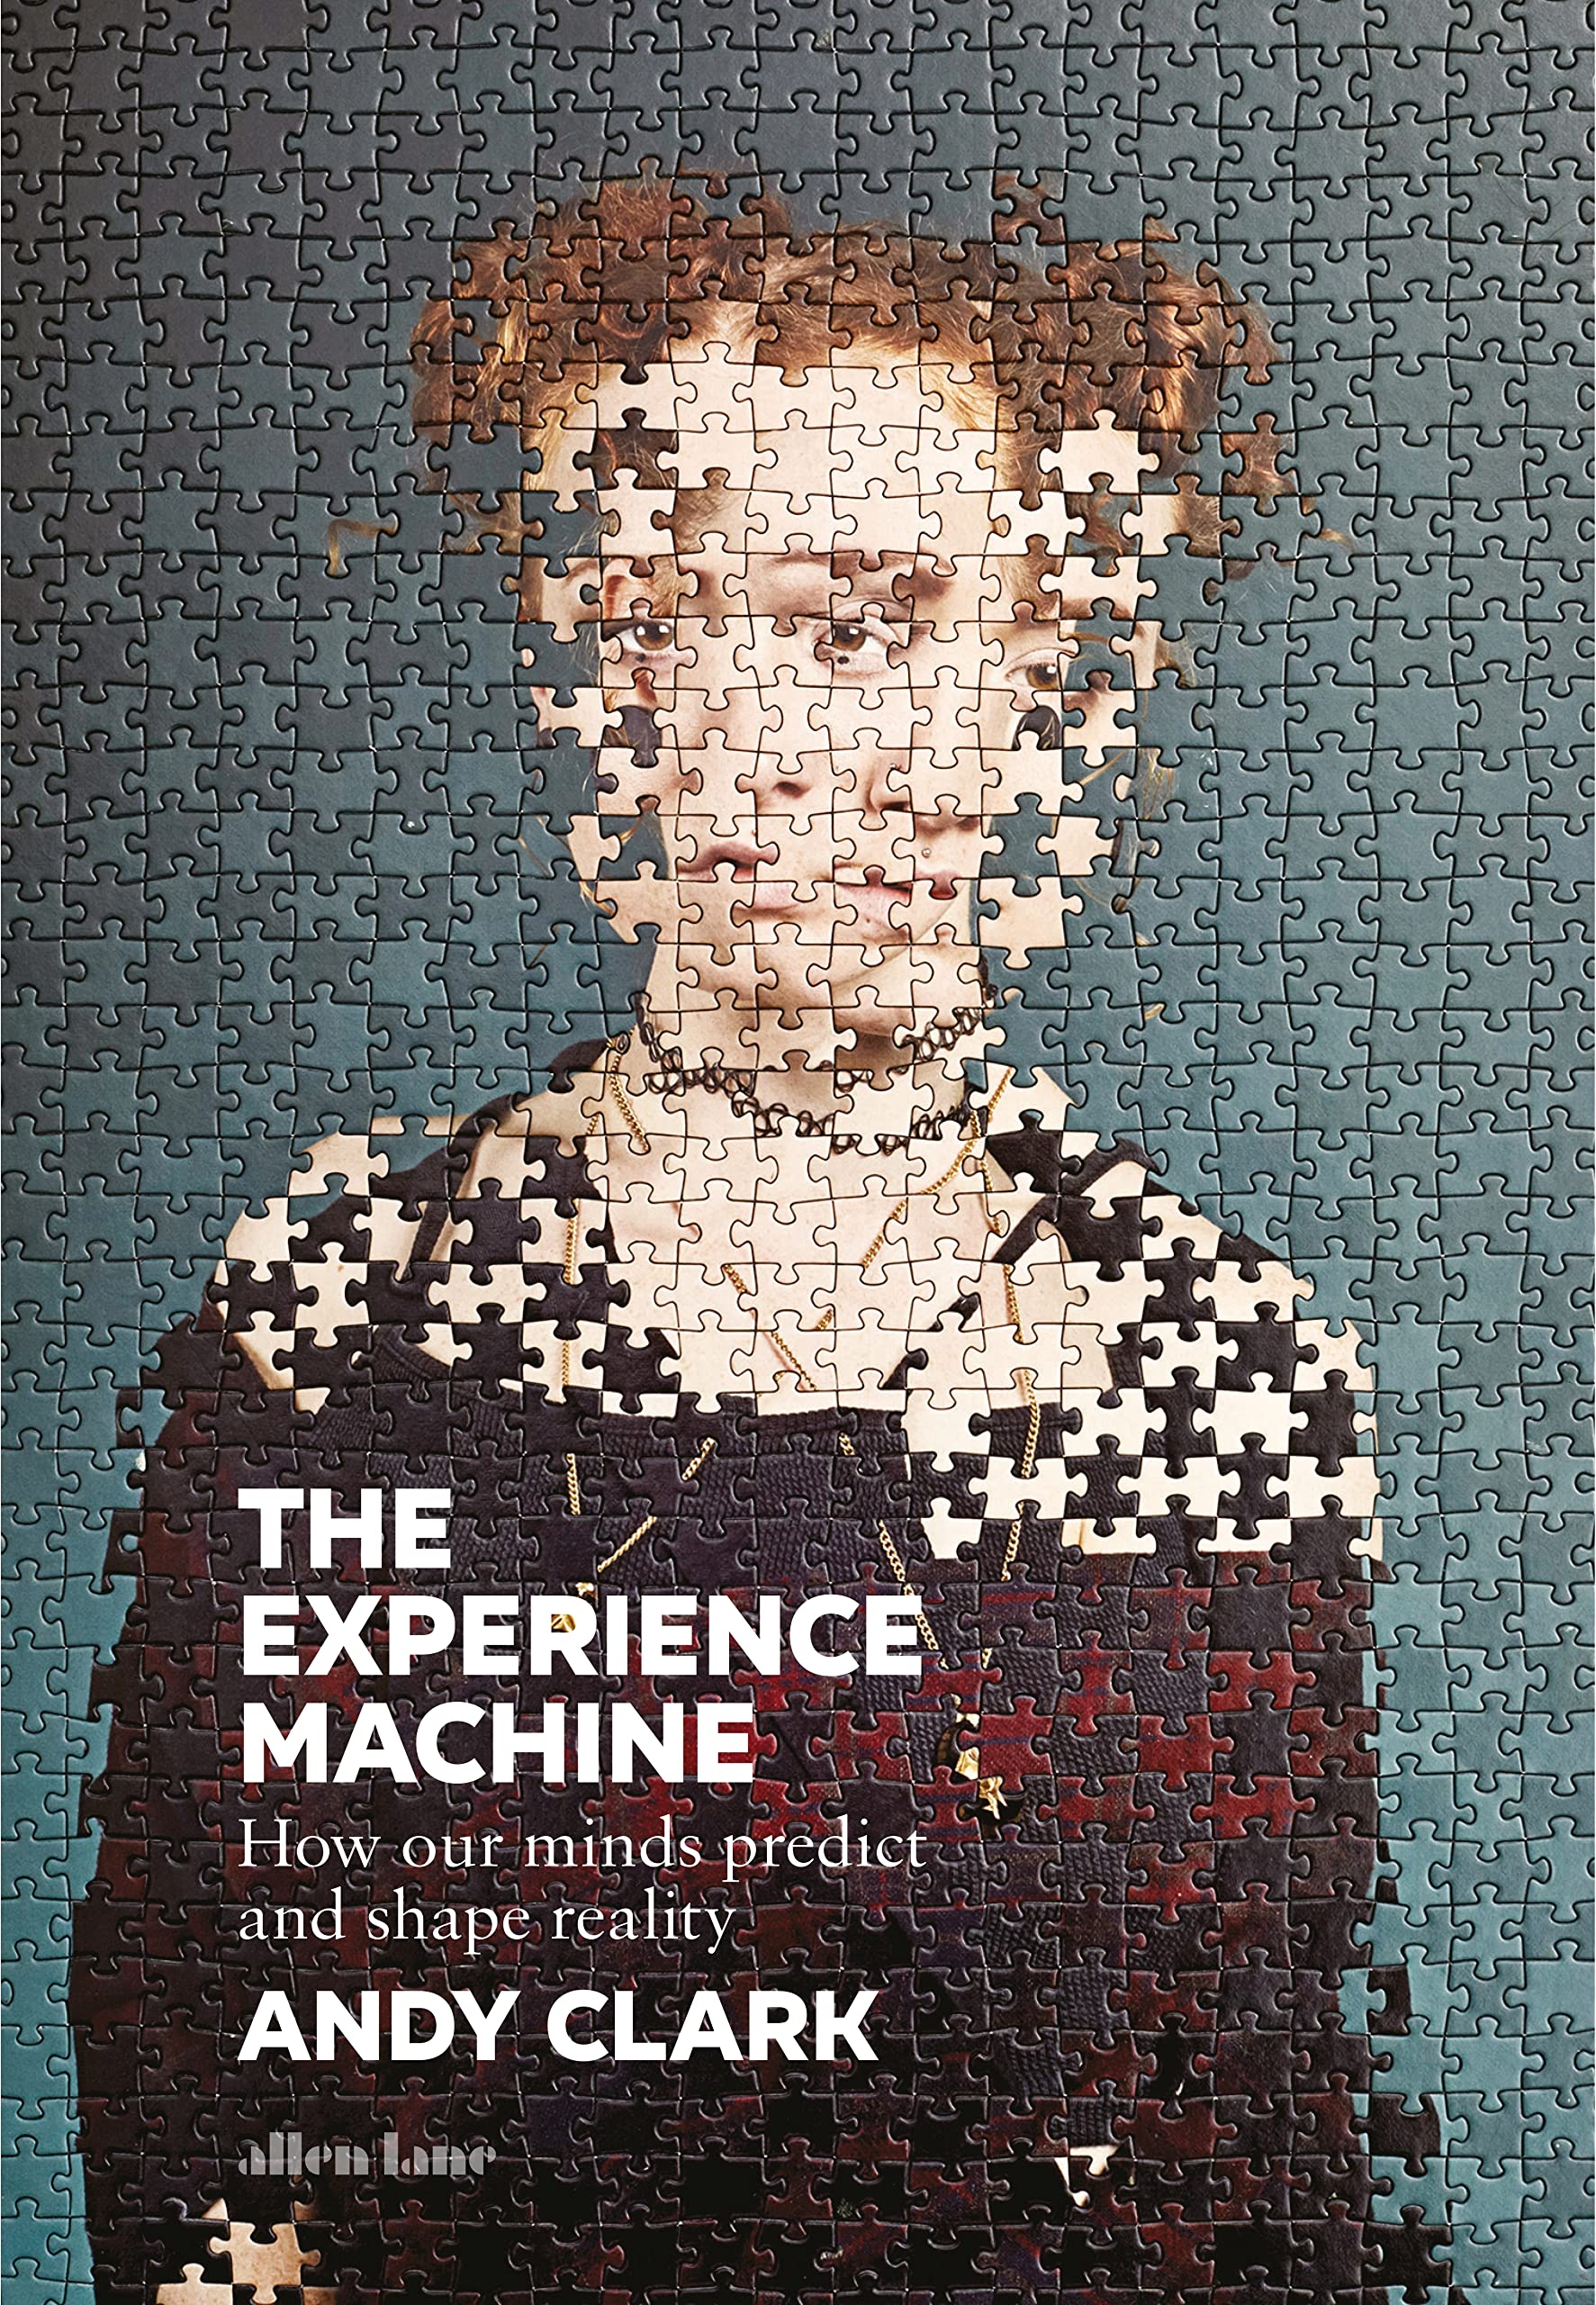 The Experience Machine | Andy Clark